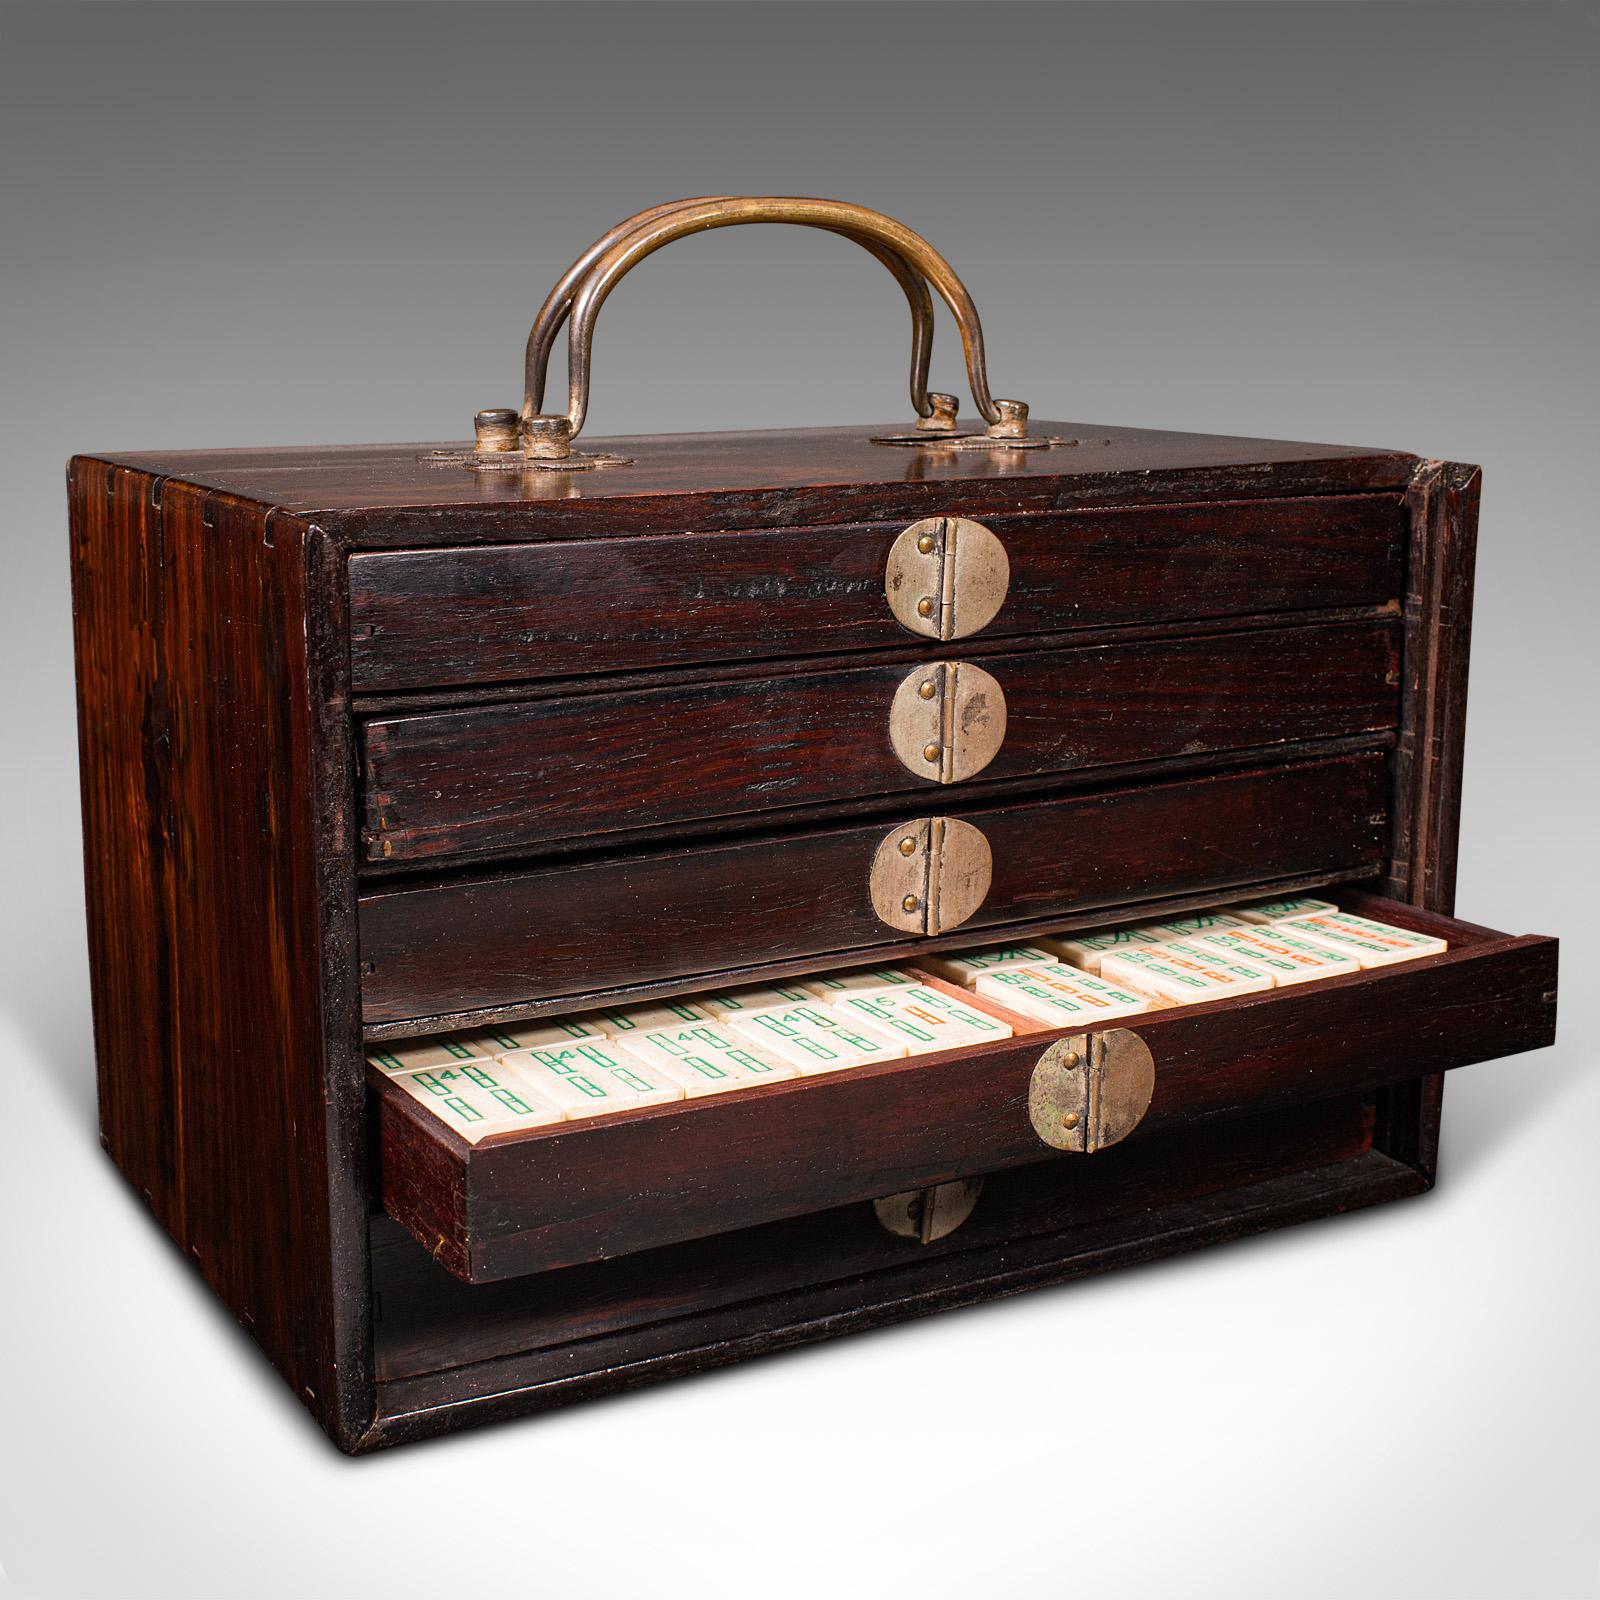 This is a vintage Mah-jong set. A Chinese, walnut cased gaming set, dating to the mid 20th century, circa 1960.

Appealing walnut and bamboo set with accessories
Displays a desirable aged patina throughout
Select stocks to the case with inlaid